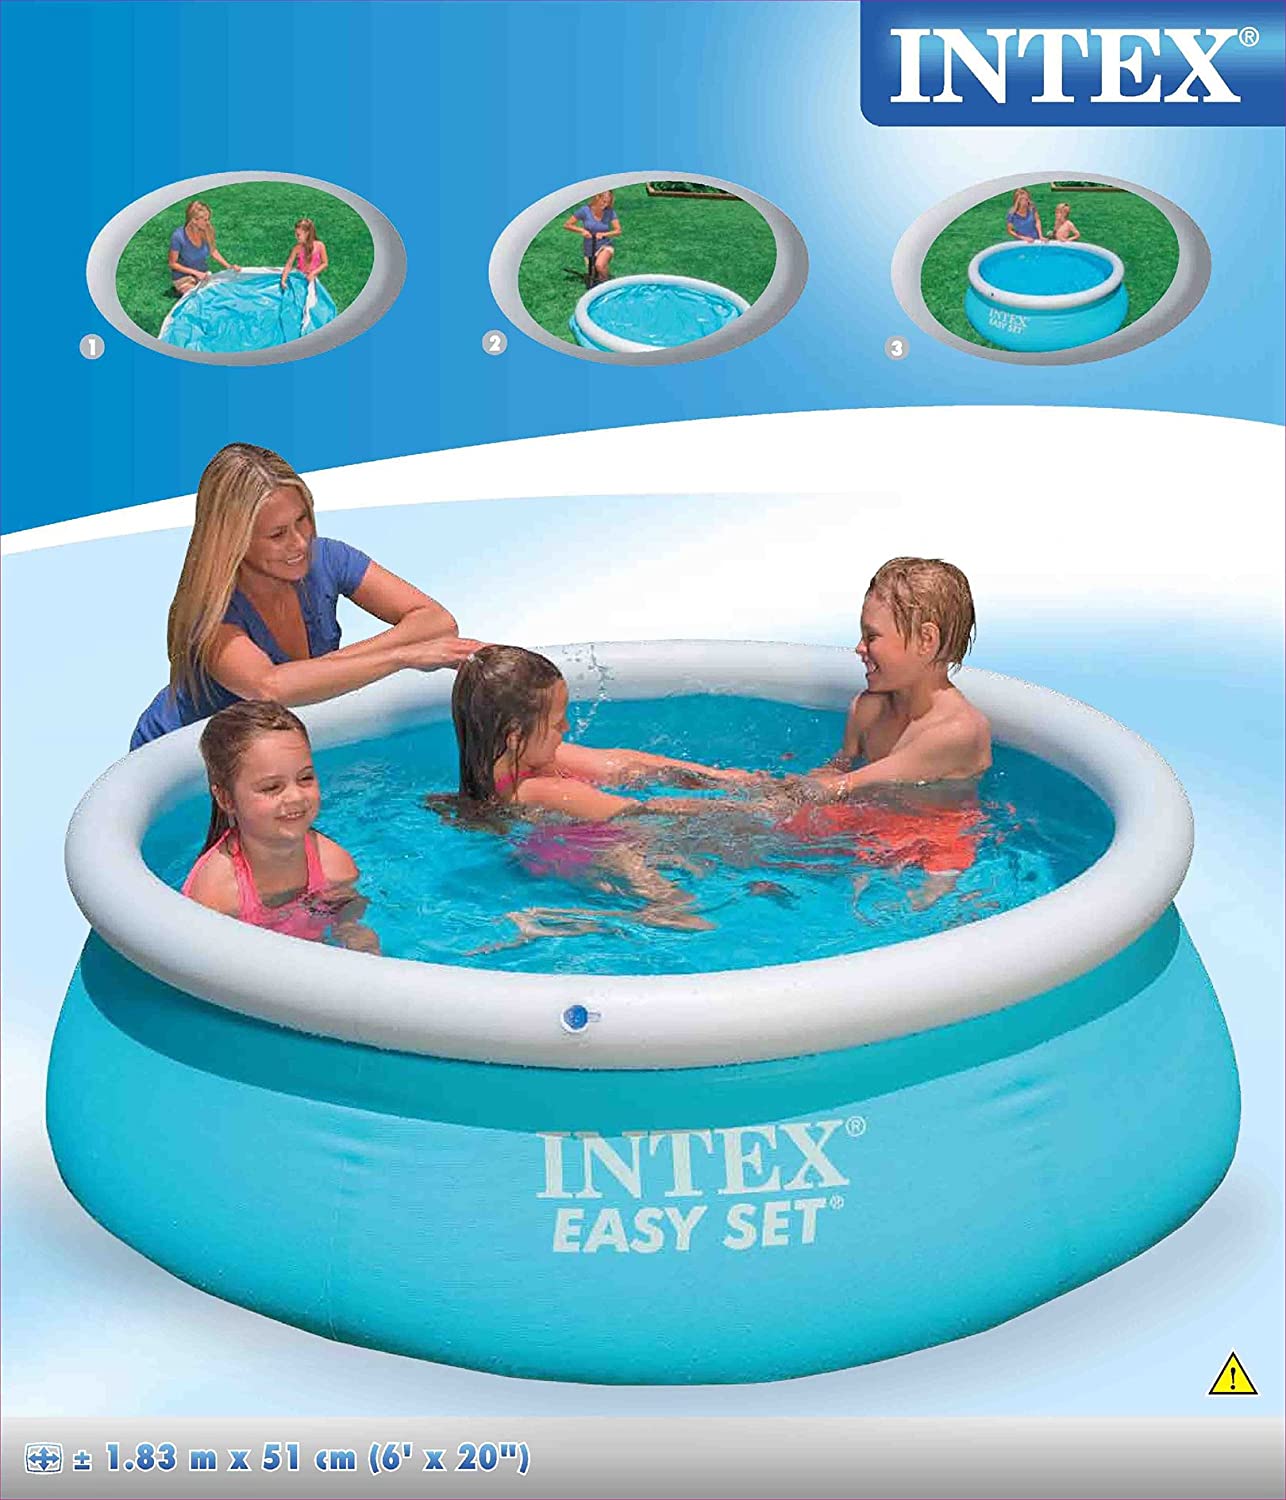 Intex 28101 6ft x 20in Inflatable Easy Set Round Outdoor Swimming Pool